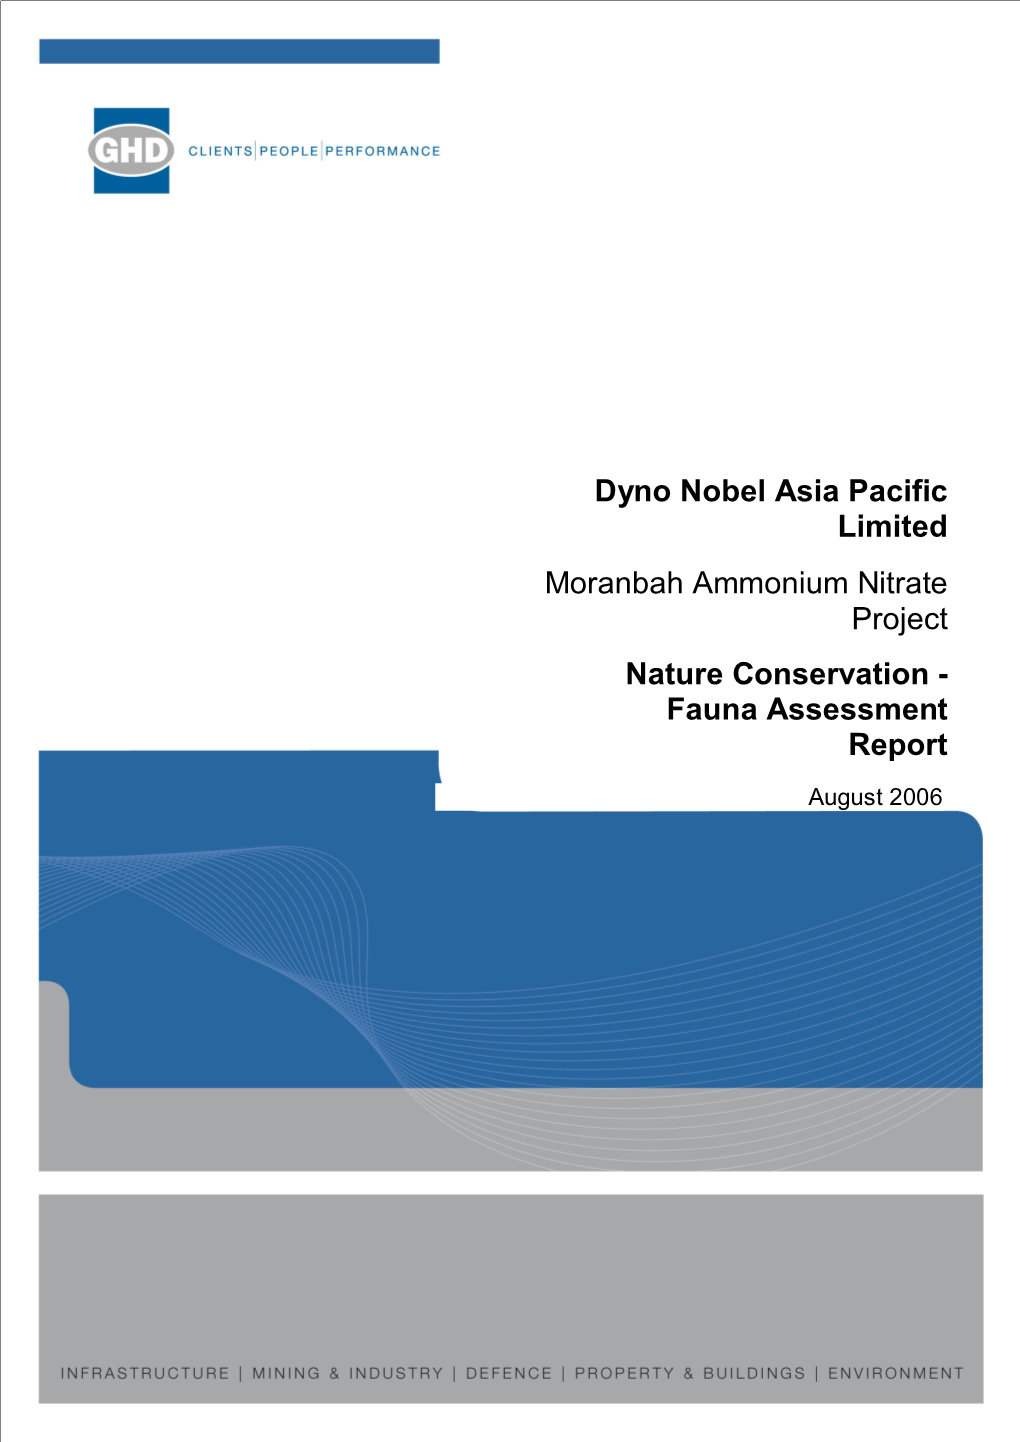 Dyno Nobel Asia Pacific Limited Moranbah Ammonium Nitrate Project Nature Conservation - Fauna Assessment Report